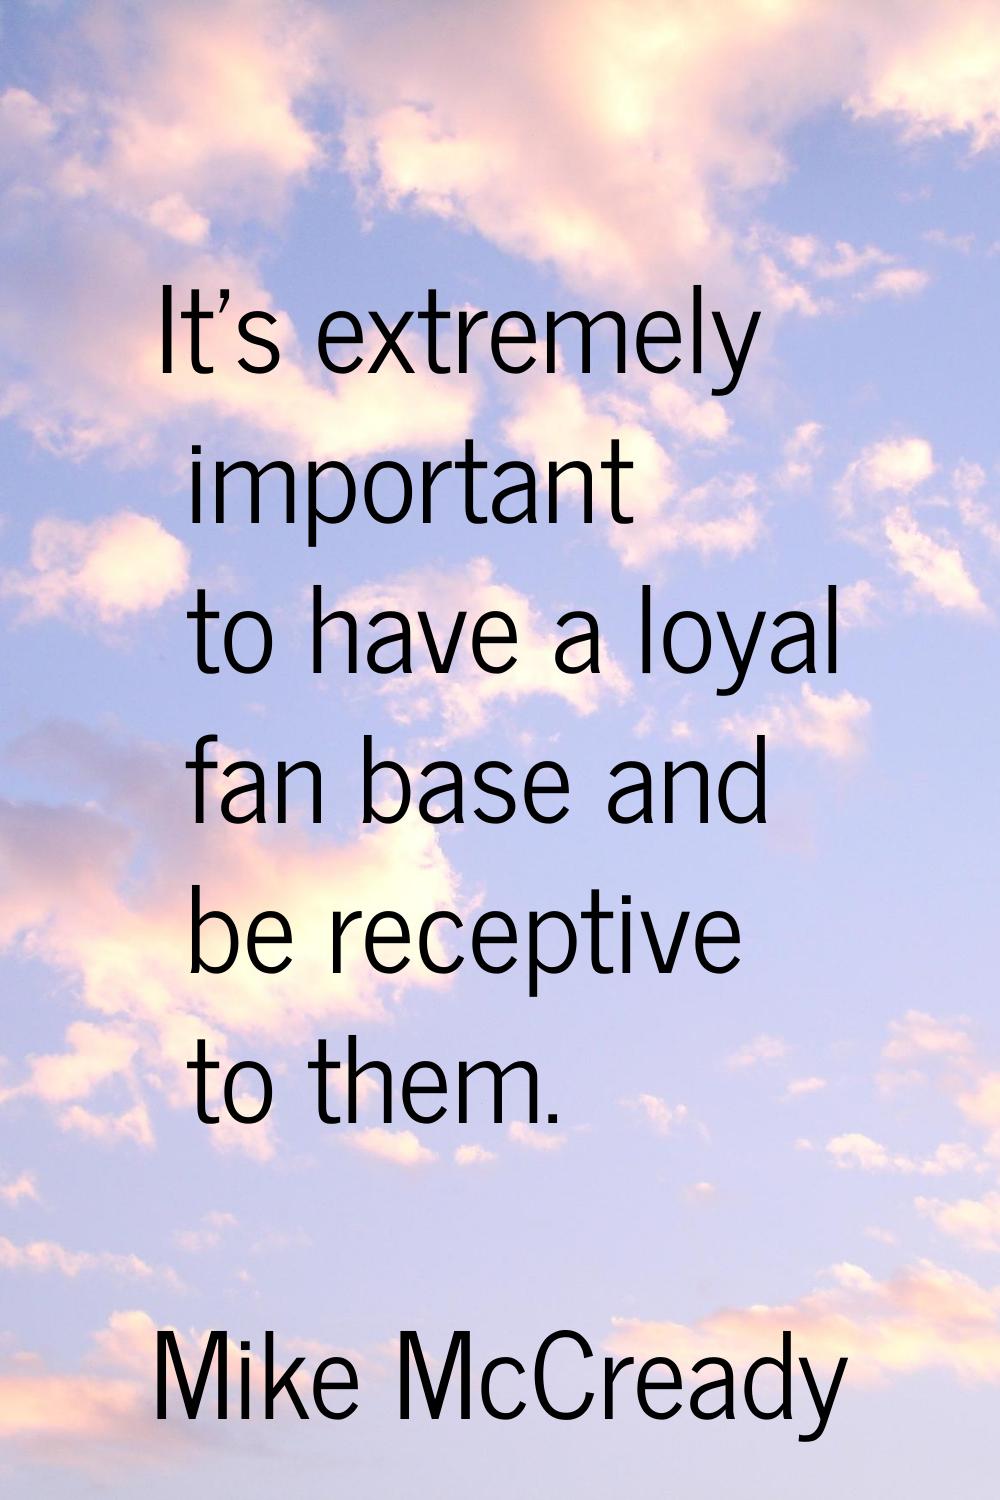 It's extremely important to have a loyal fan base and be receptive to them.